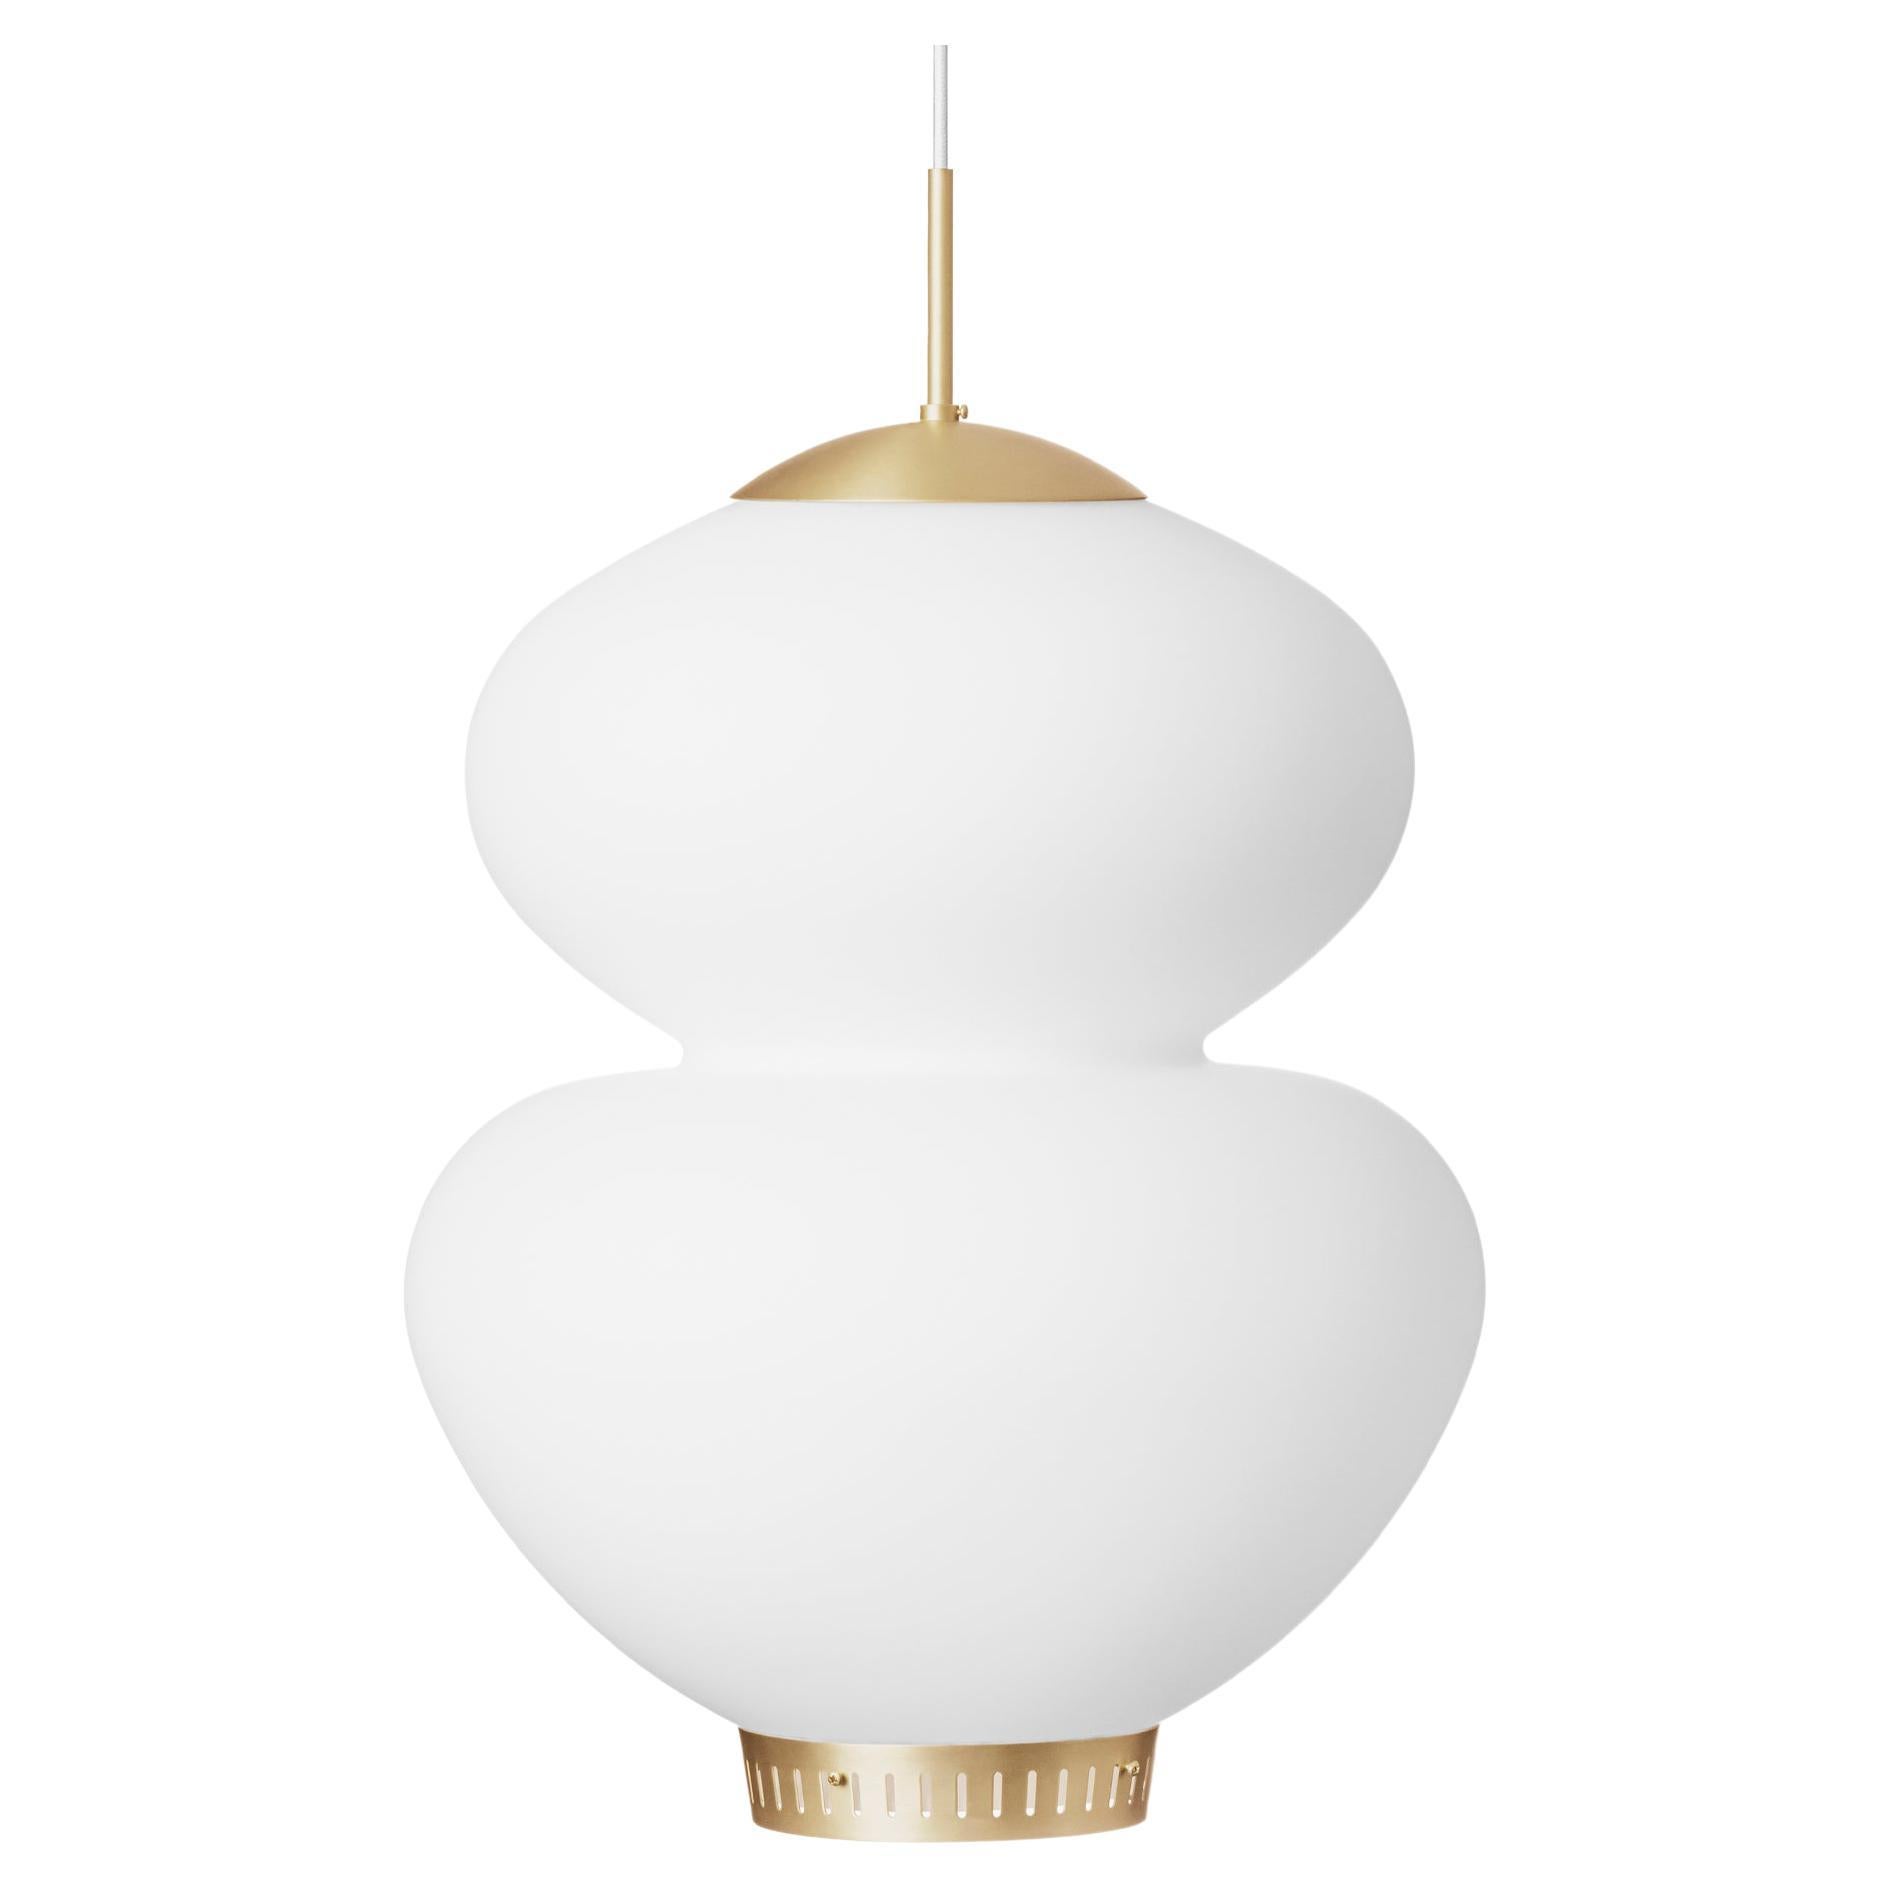 'Peanut 250' Pendant Lamp by Bent Karlby for Lyfa 'New Edition' For Sale